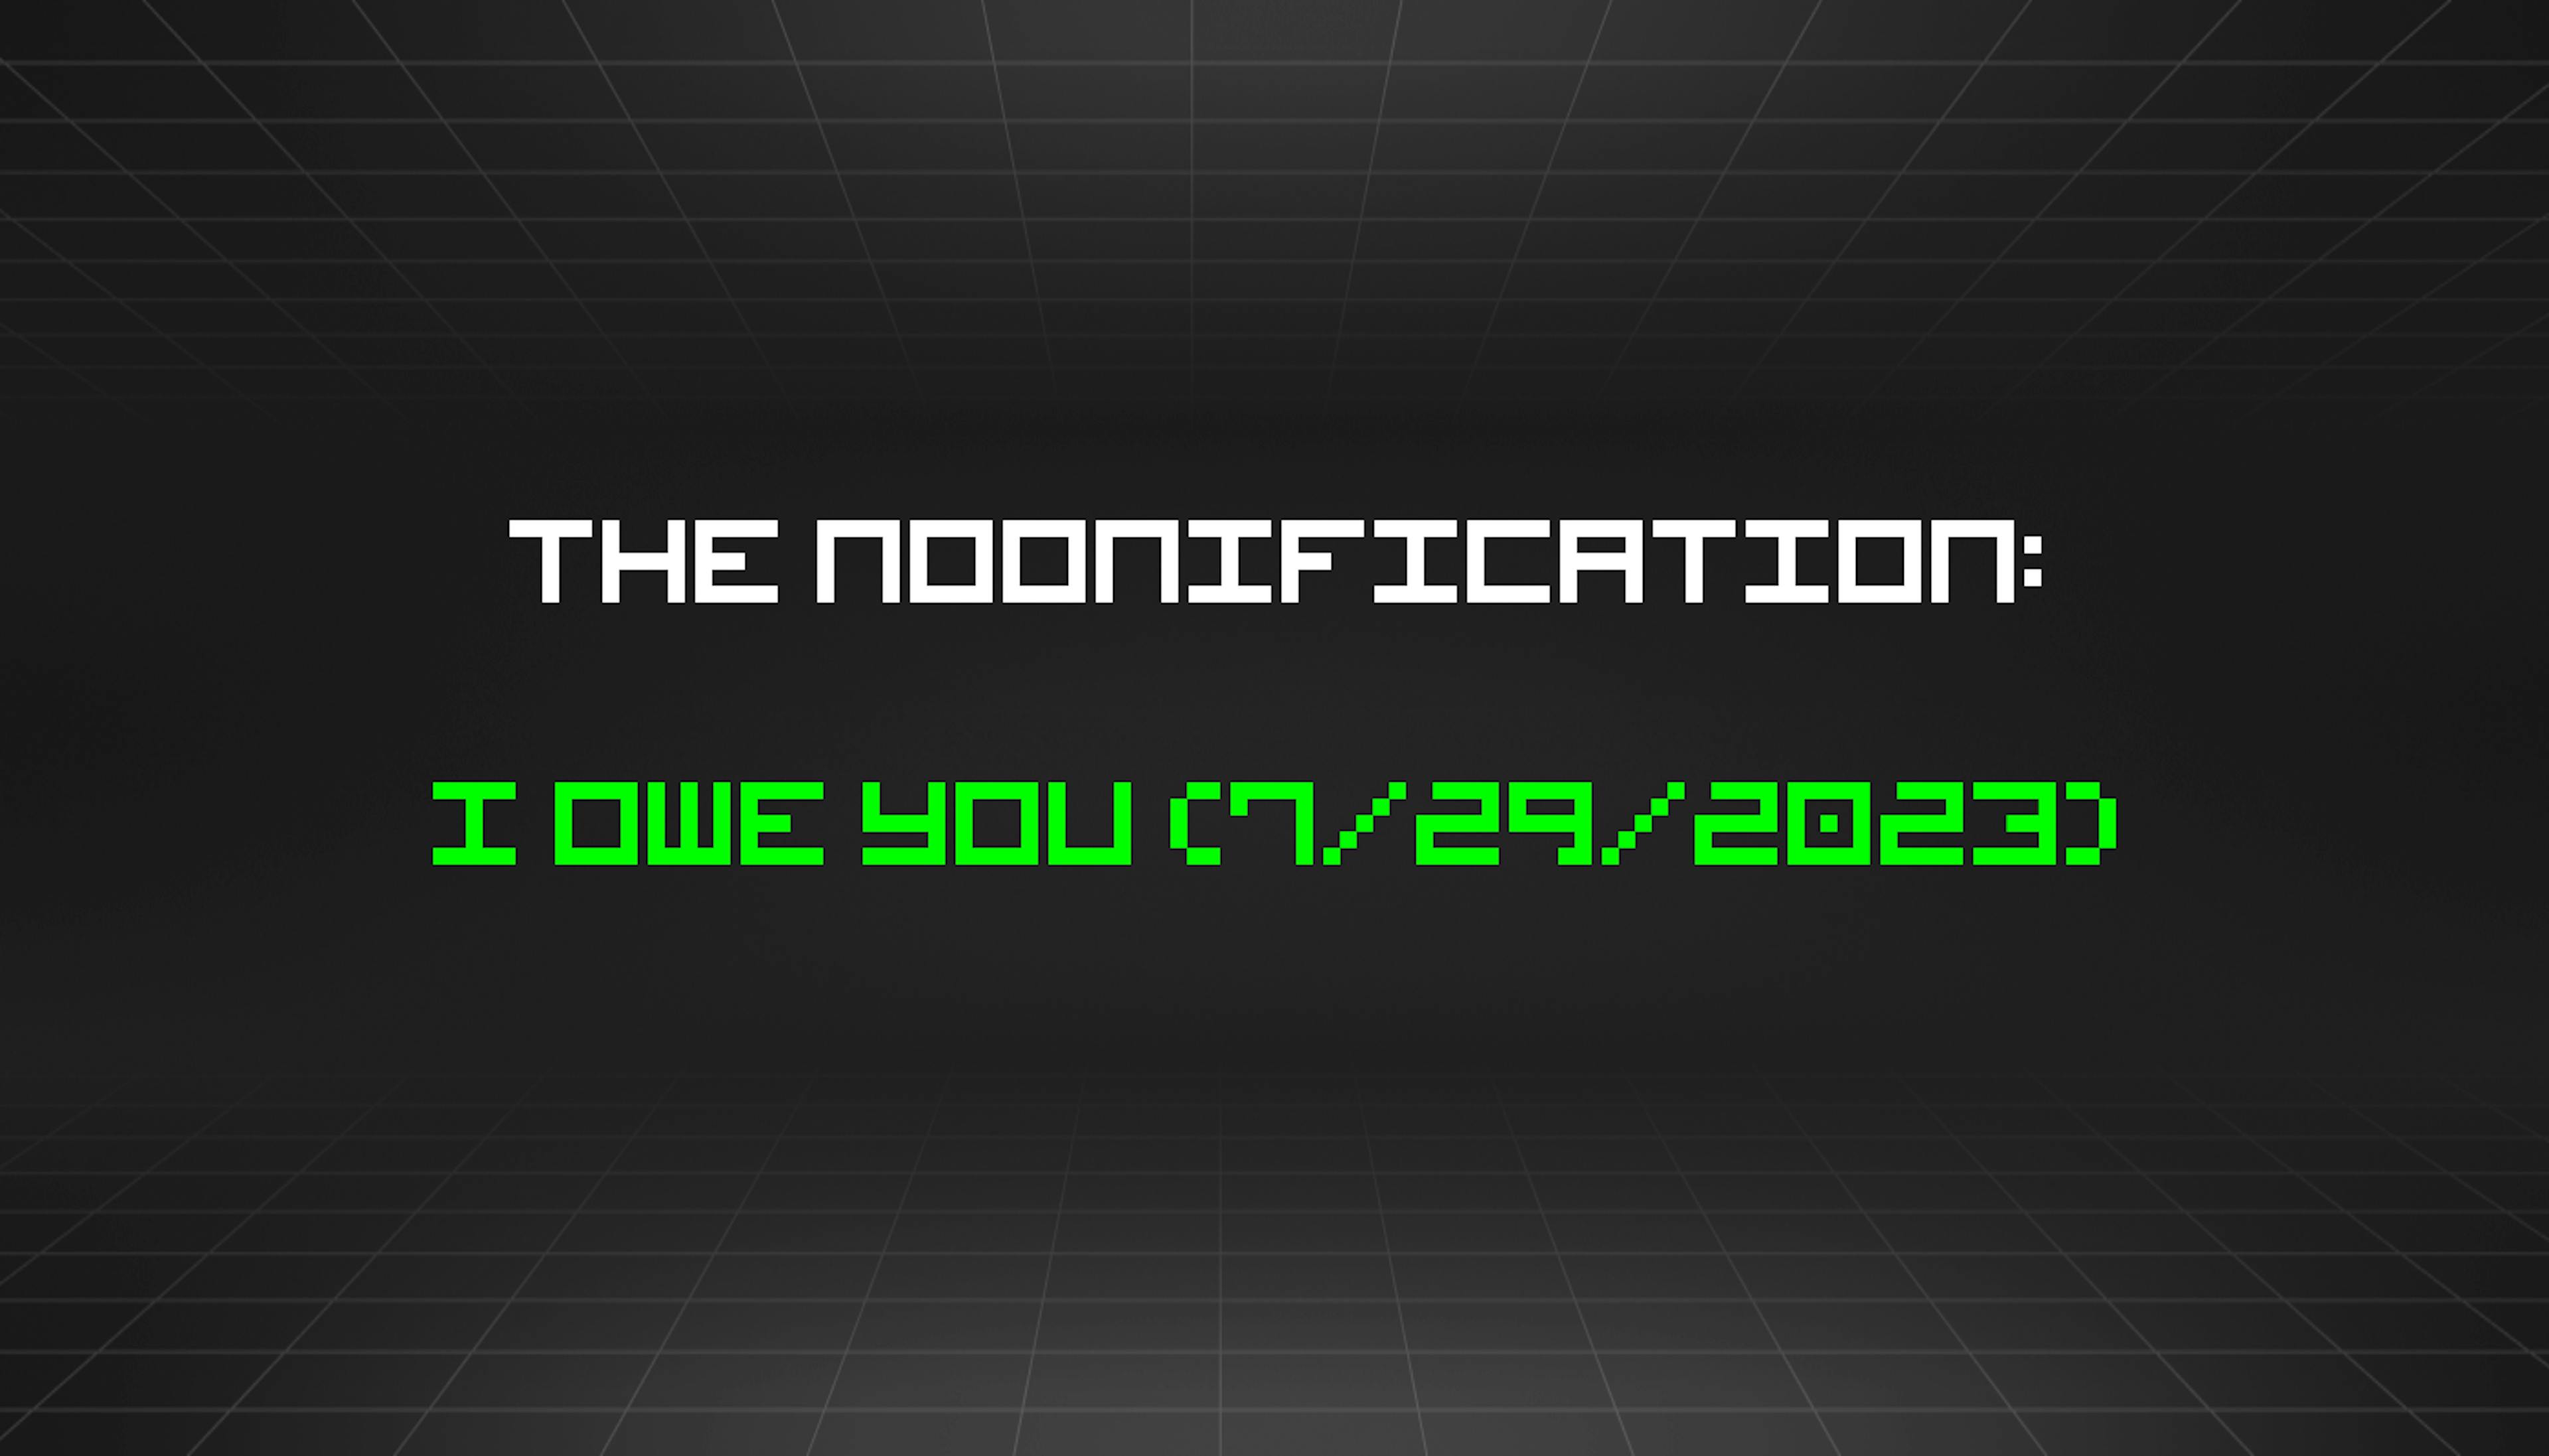 featured image - The Noonification: I Owe You (7/29/2023)